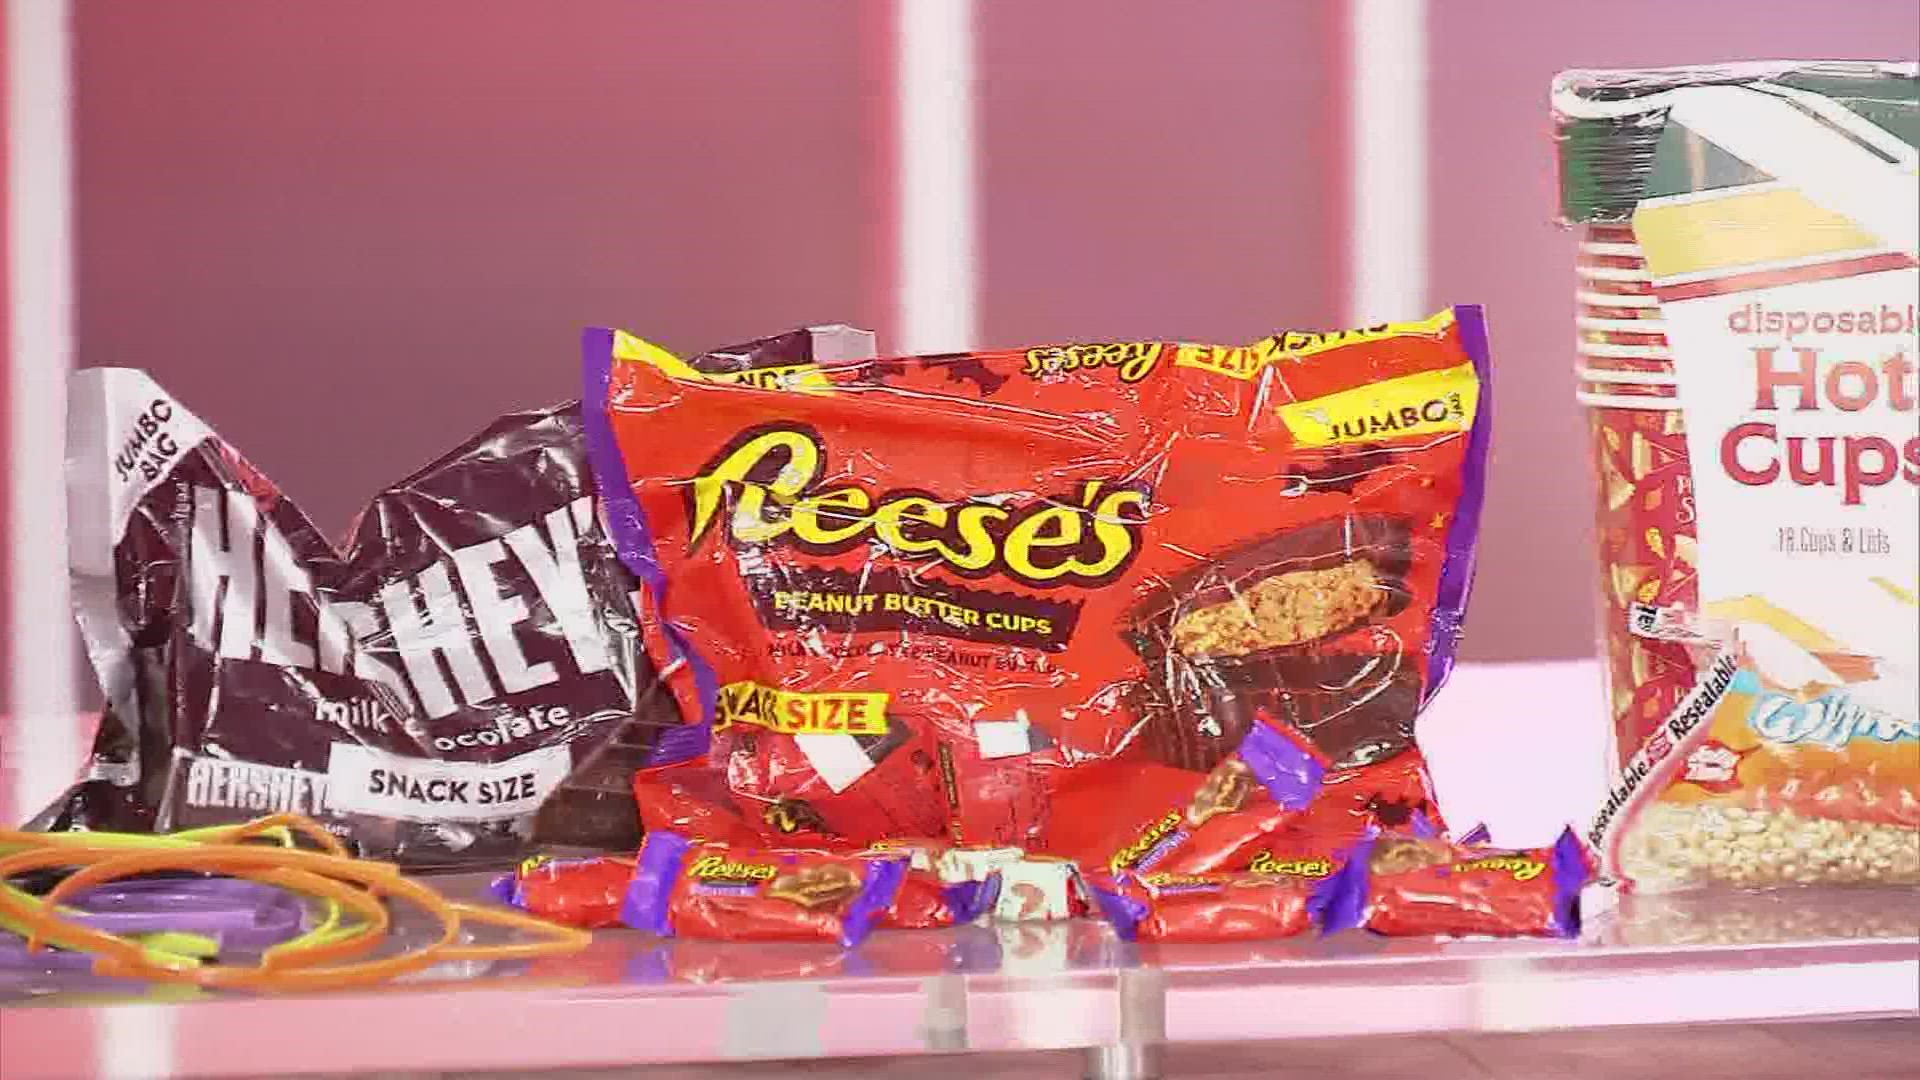 Cherie Lowe, the Queen of Free, shares how you can save on Halloween candy ahead of trick-or-treating this year.